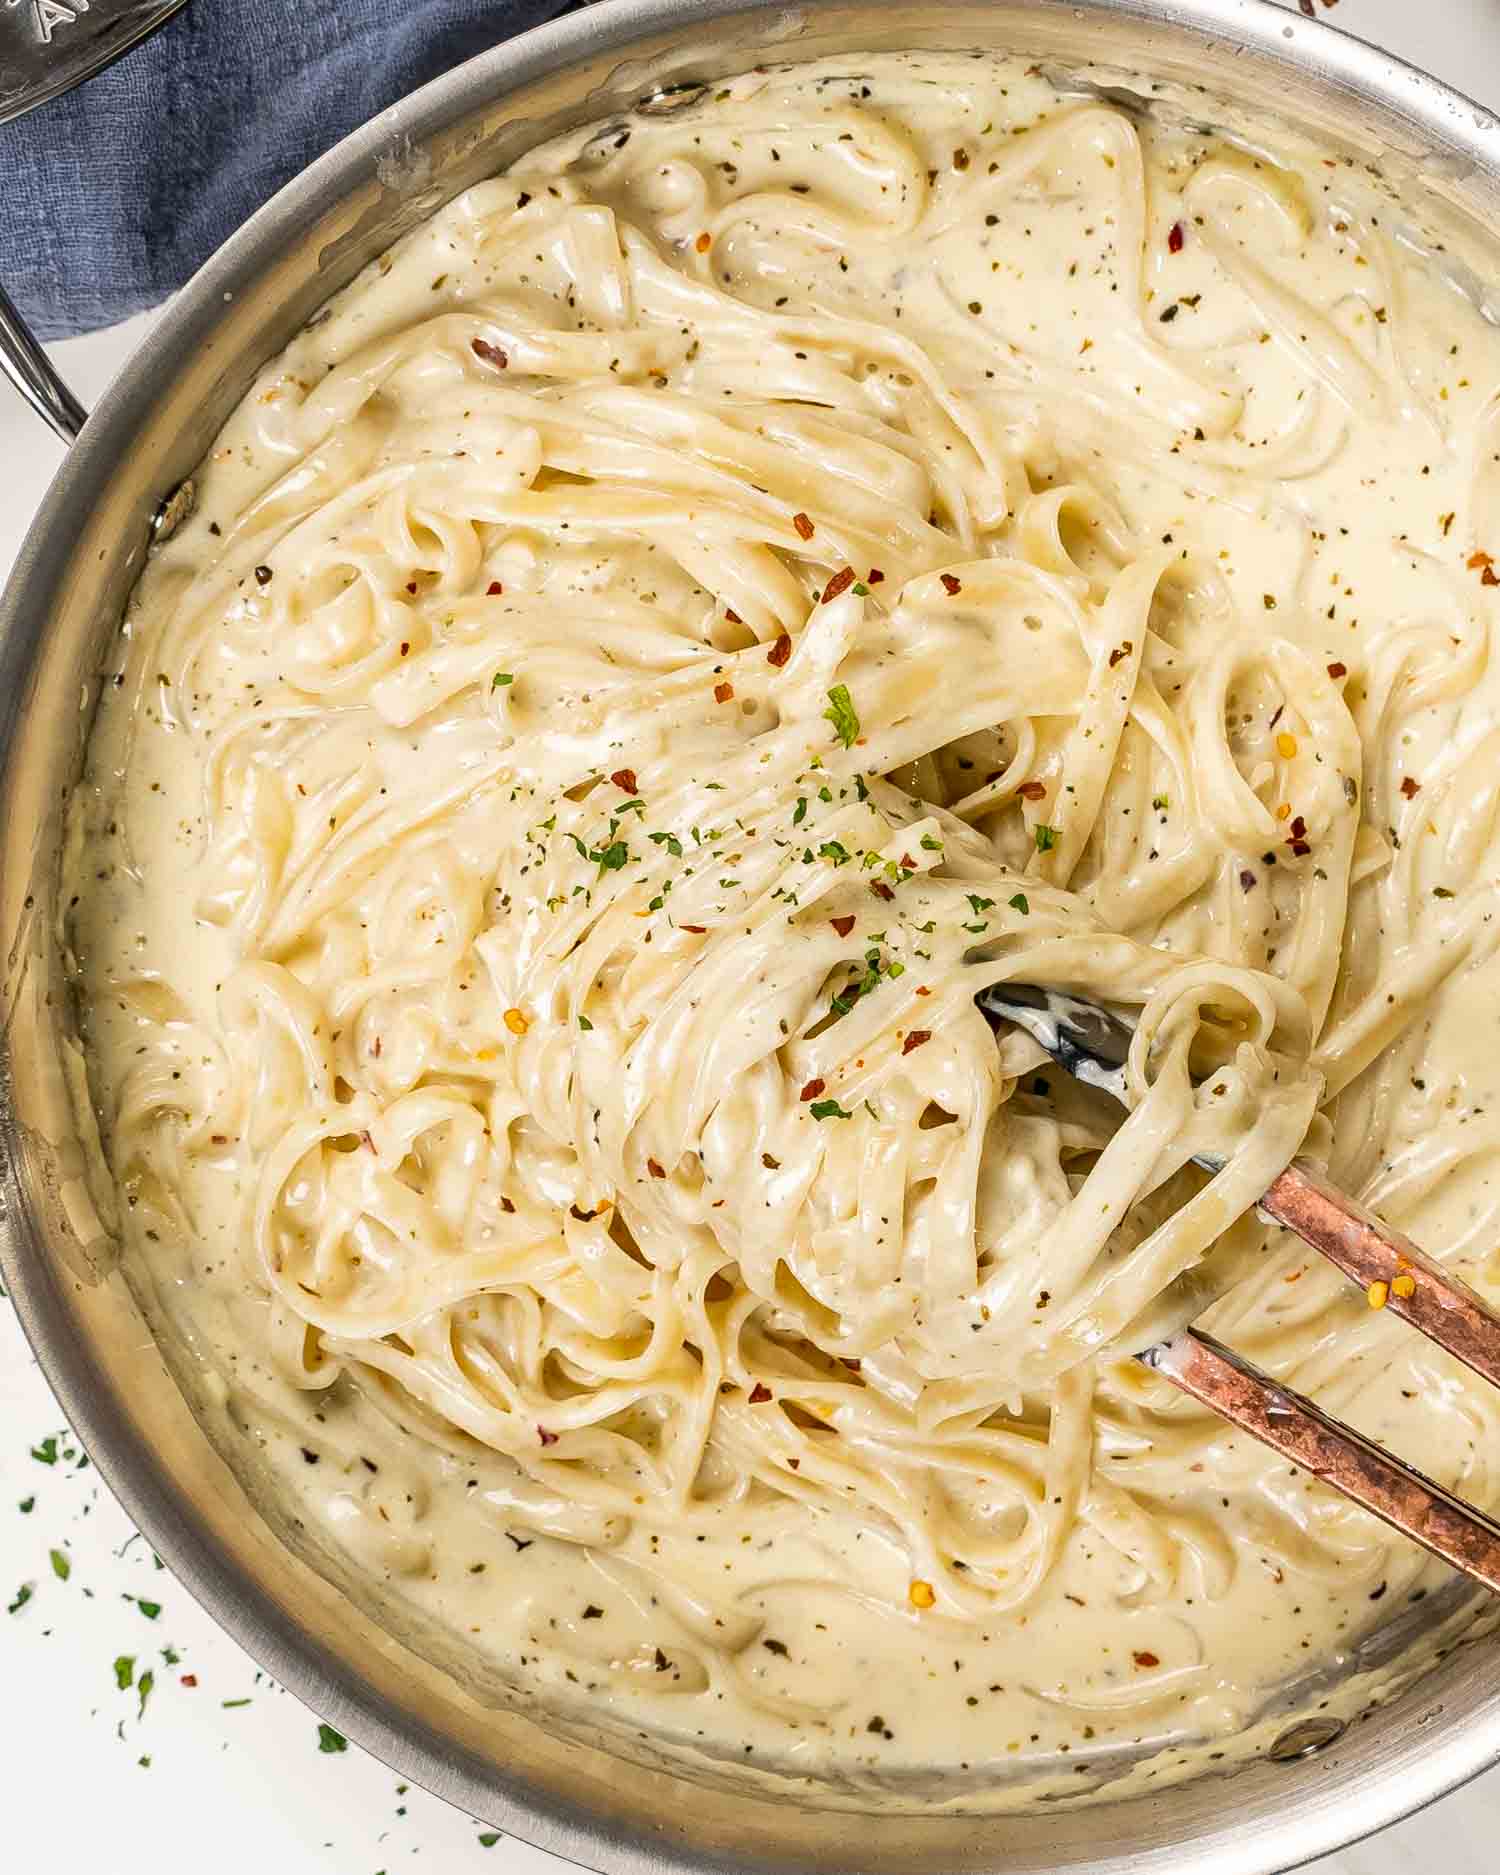 freshly made fettuccine alfredo in a skillet garnished with red pepper flakes and parsley.